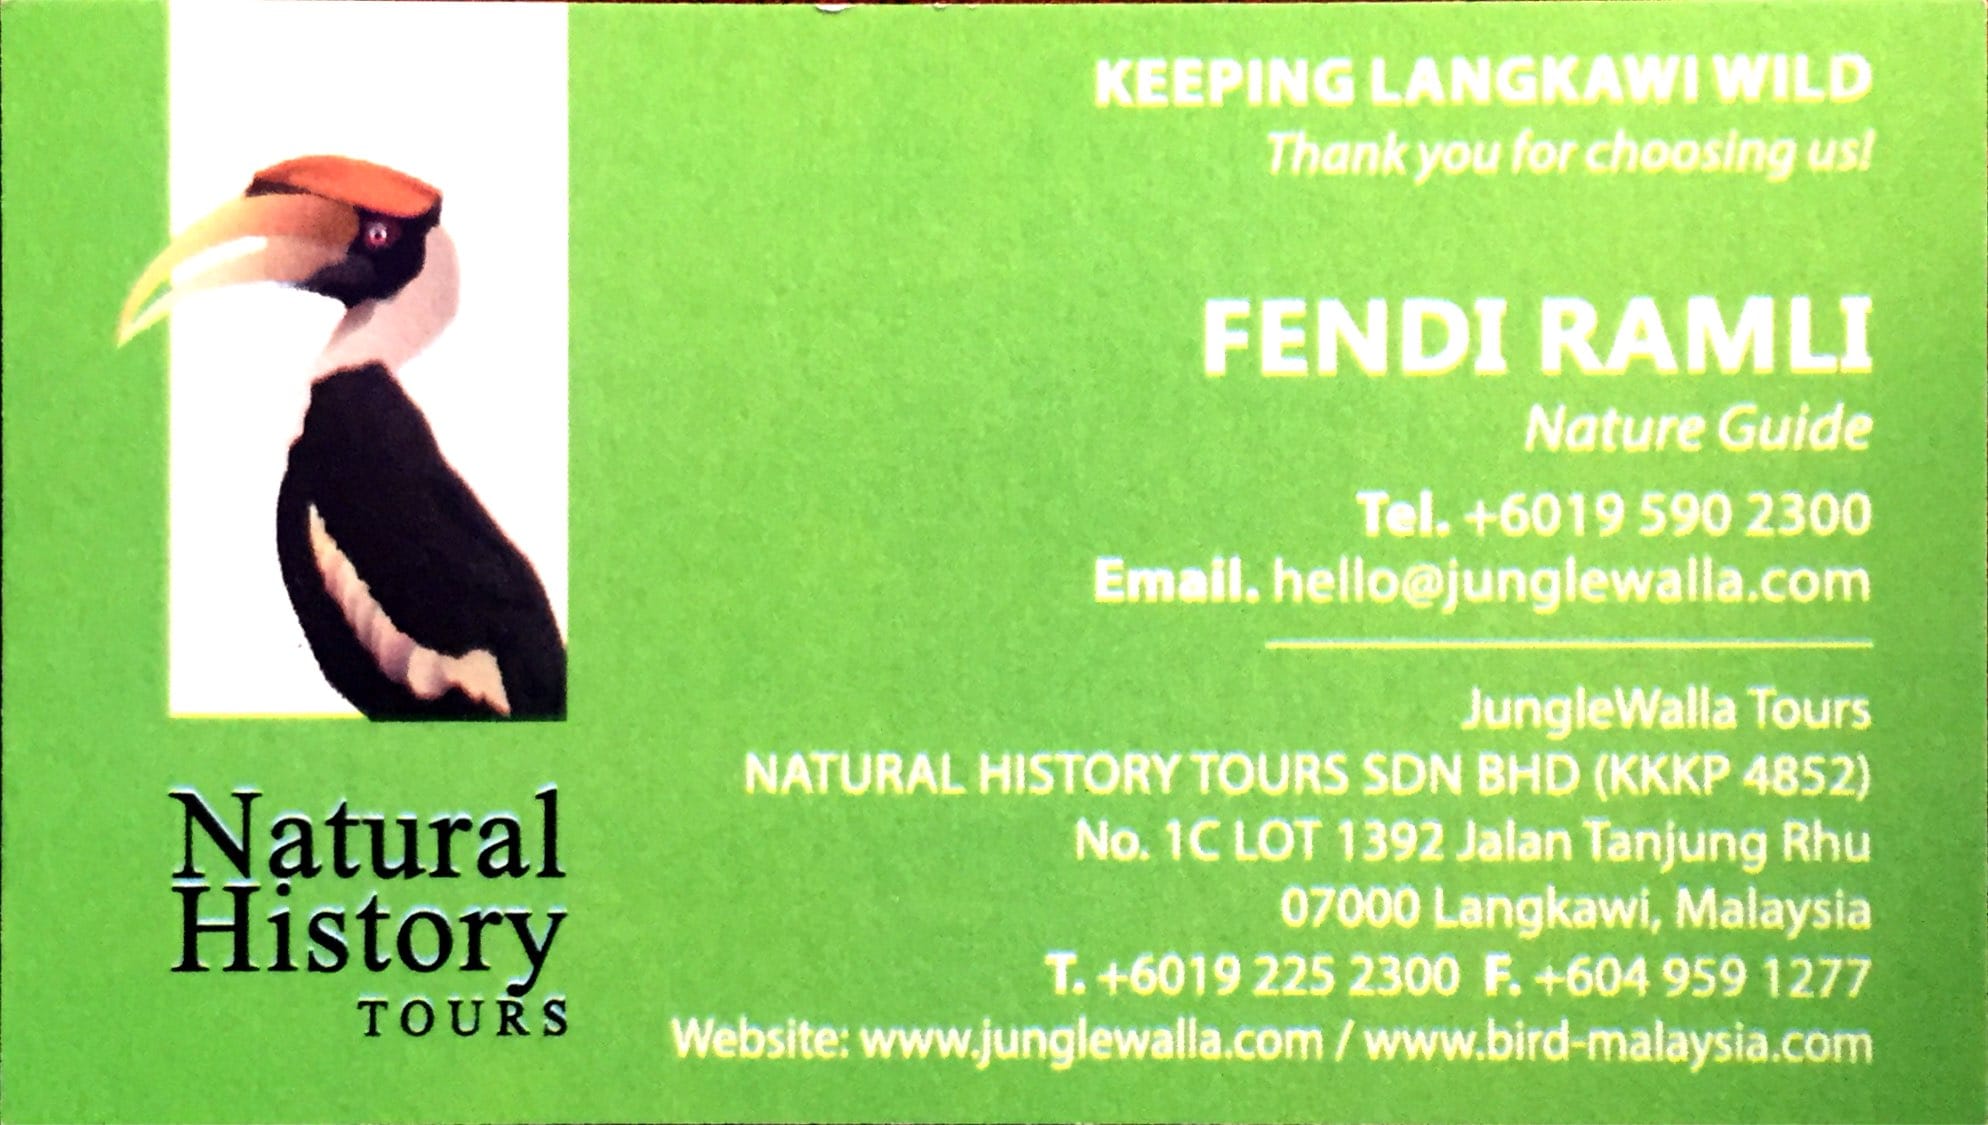 Tour guide’s business card